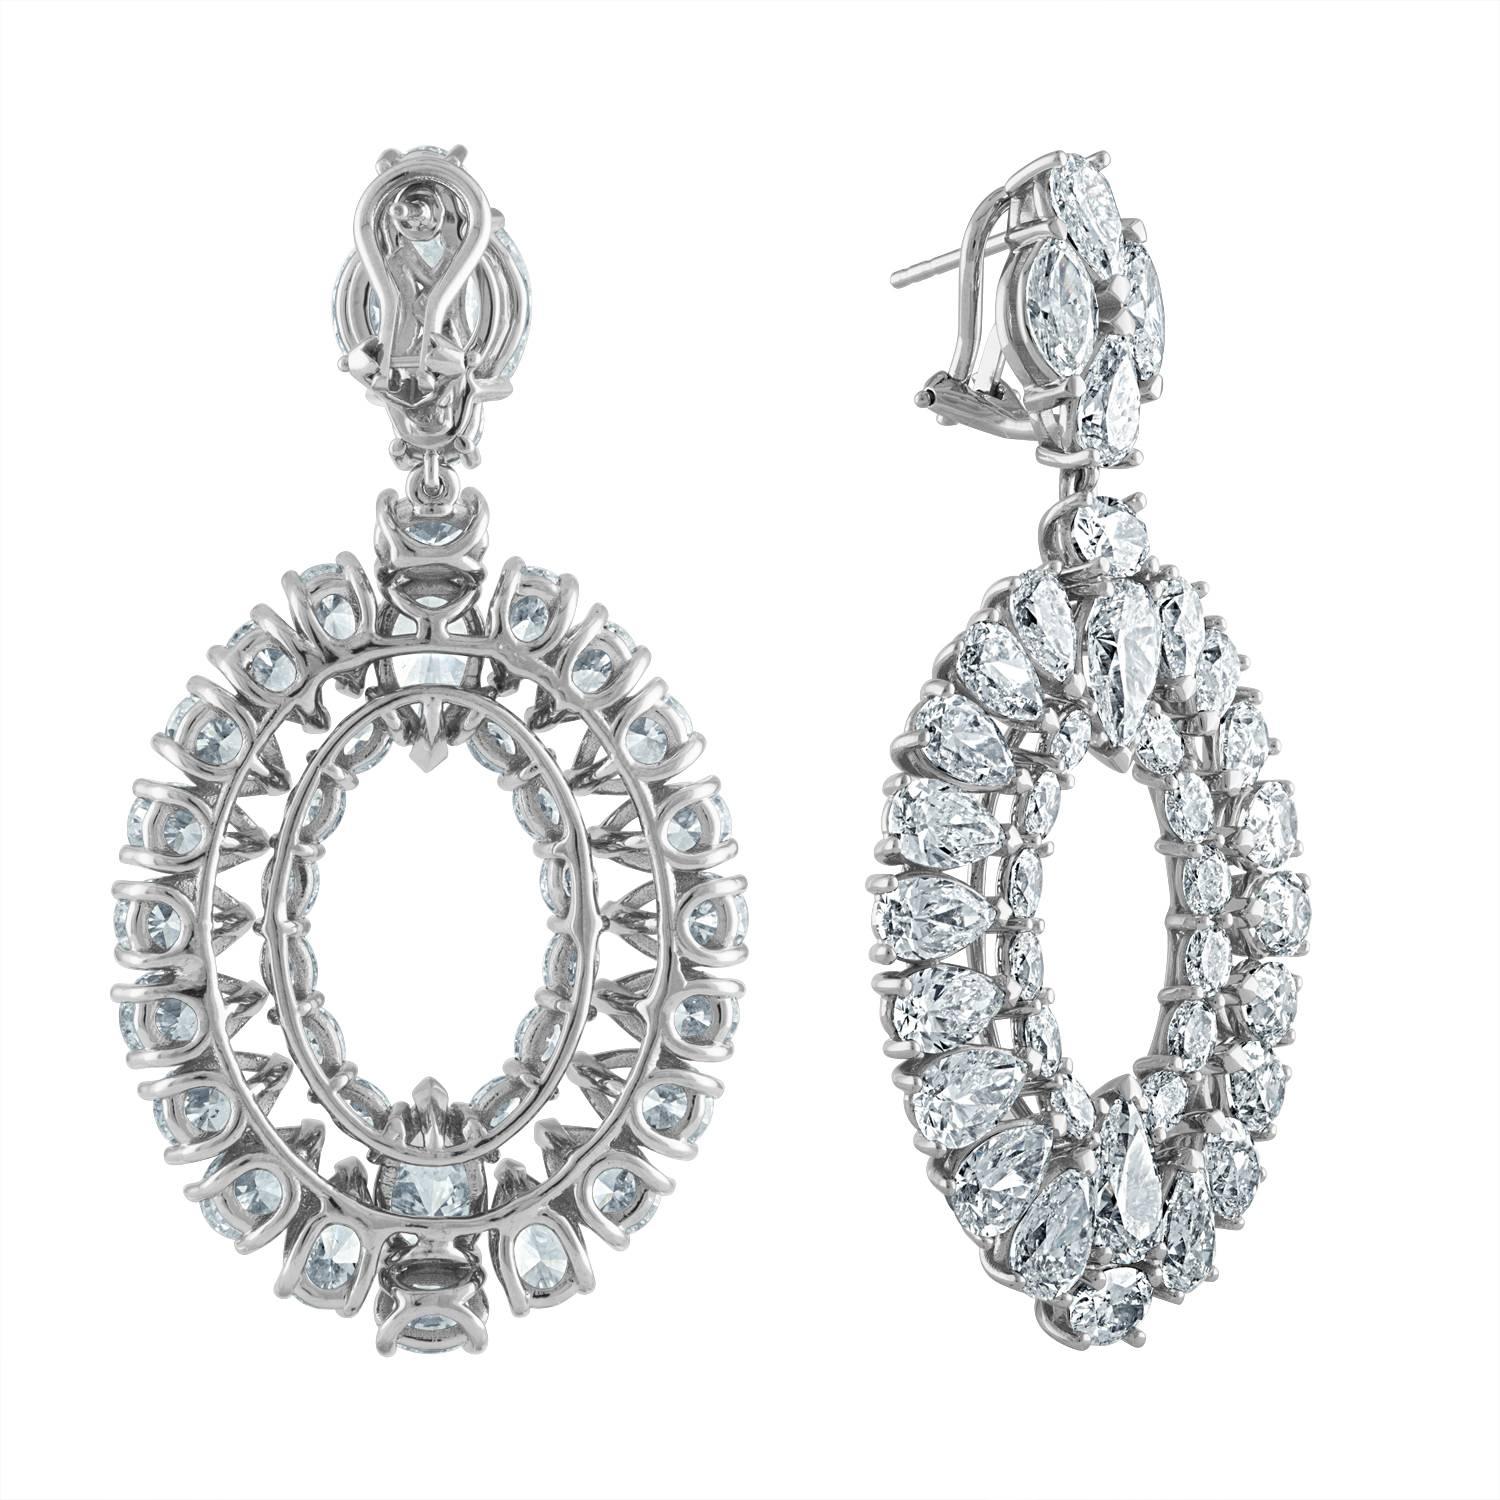 Platinum Earrings with 31.27 Carat of Fancy Shapes Diamonds 1